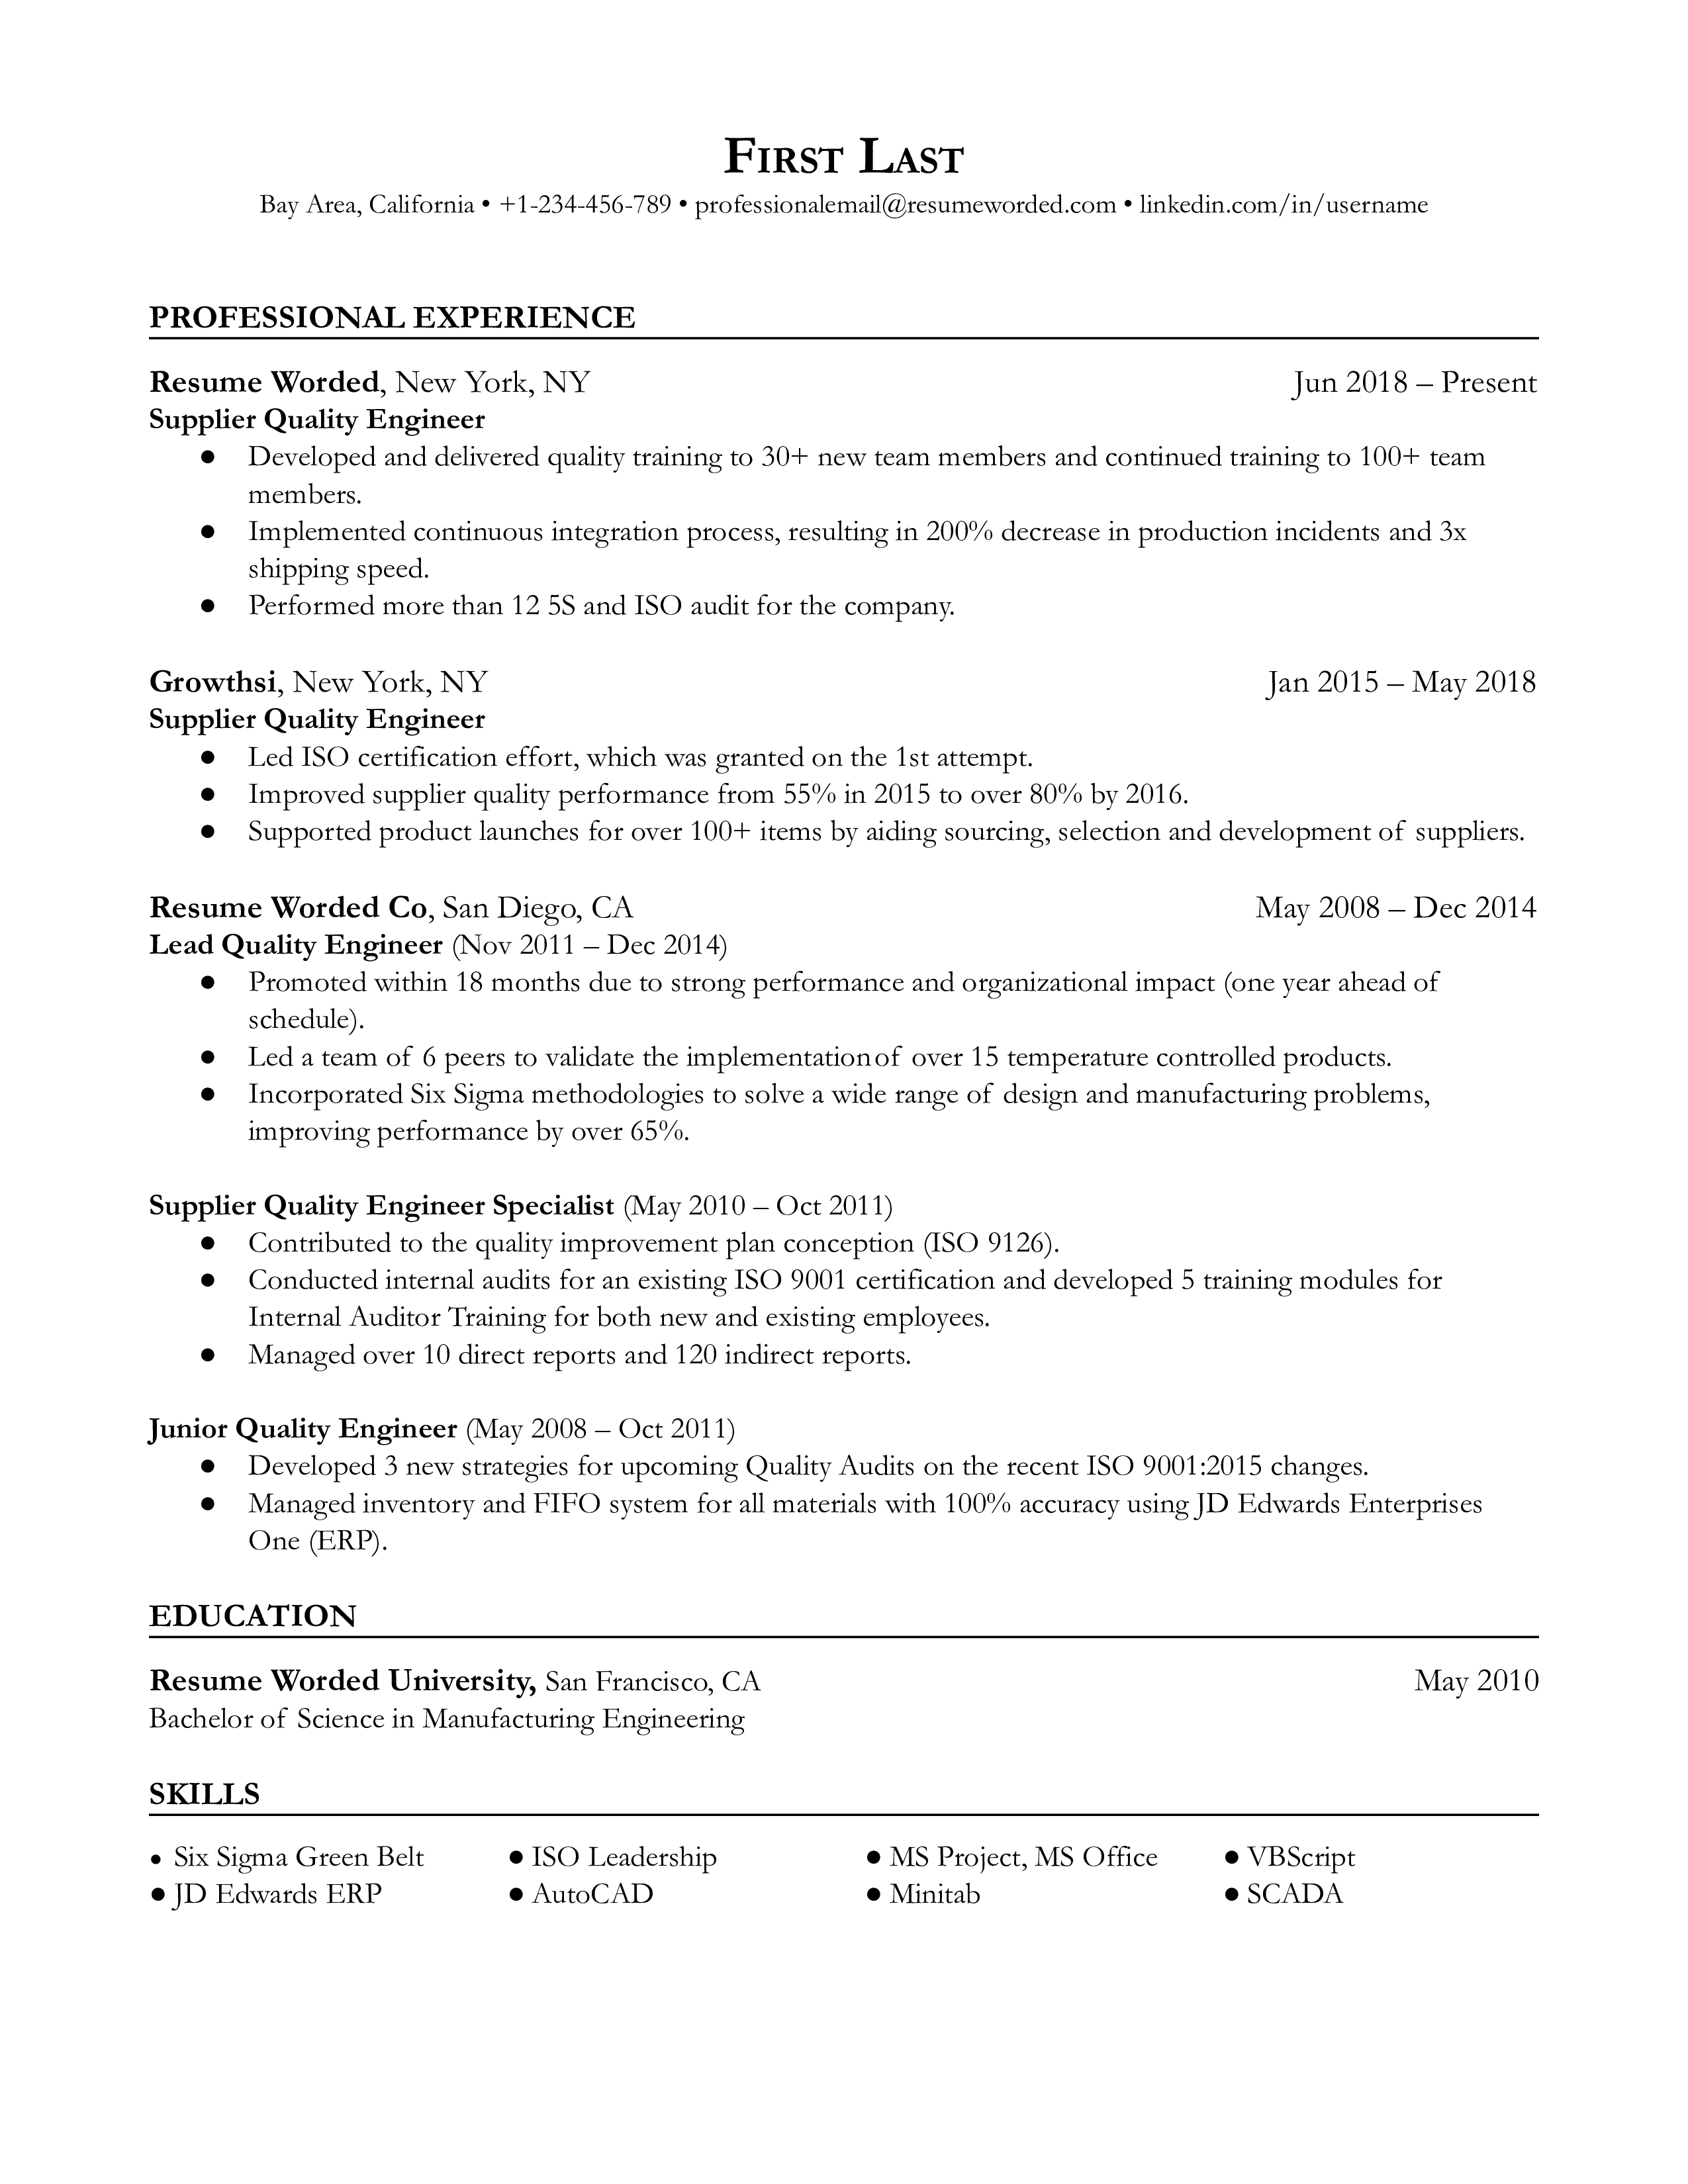 A resume for a Supplier Quality Engineer focusing on industry-specific experience and data analysis skills.